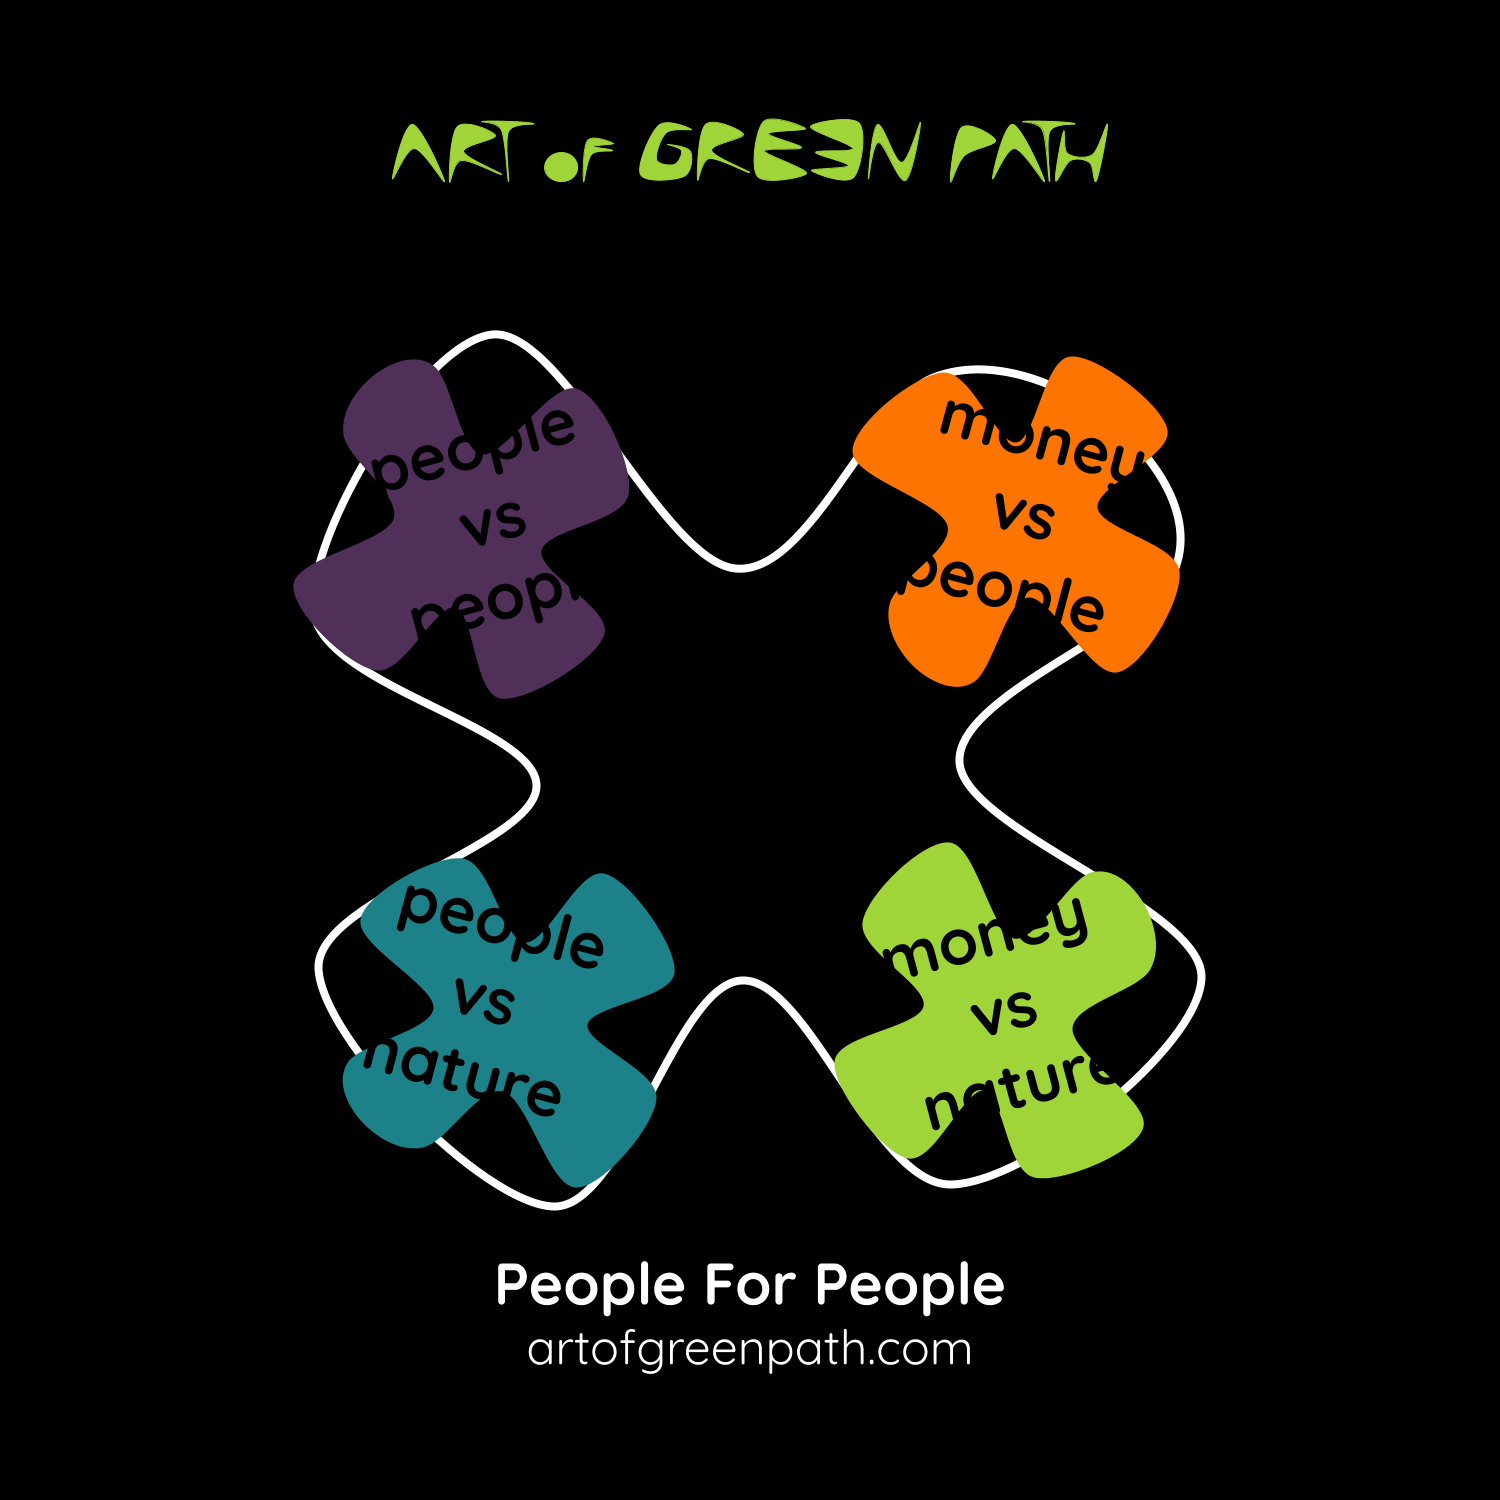 Art Of Green Path - People For People